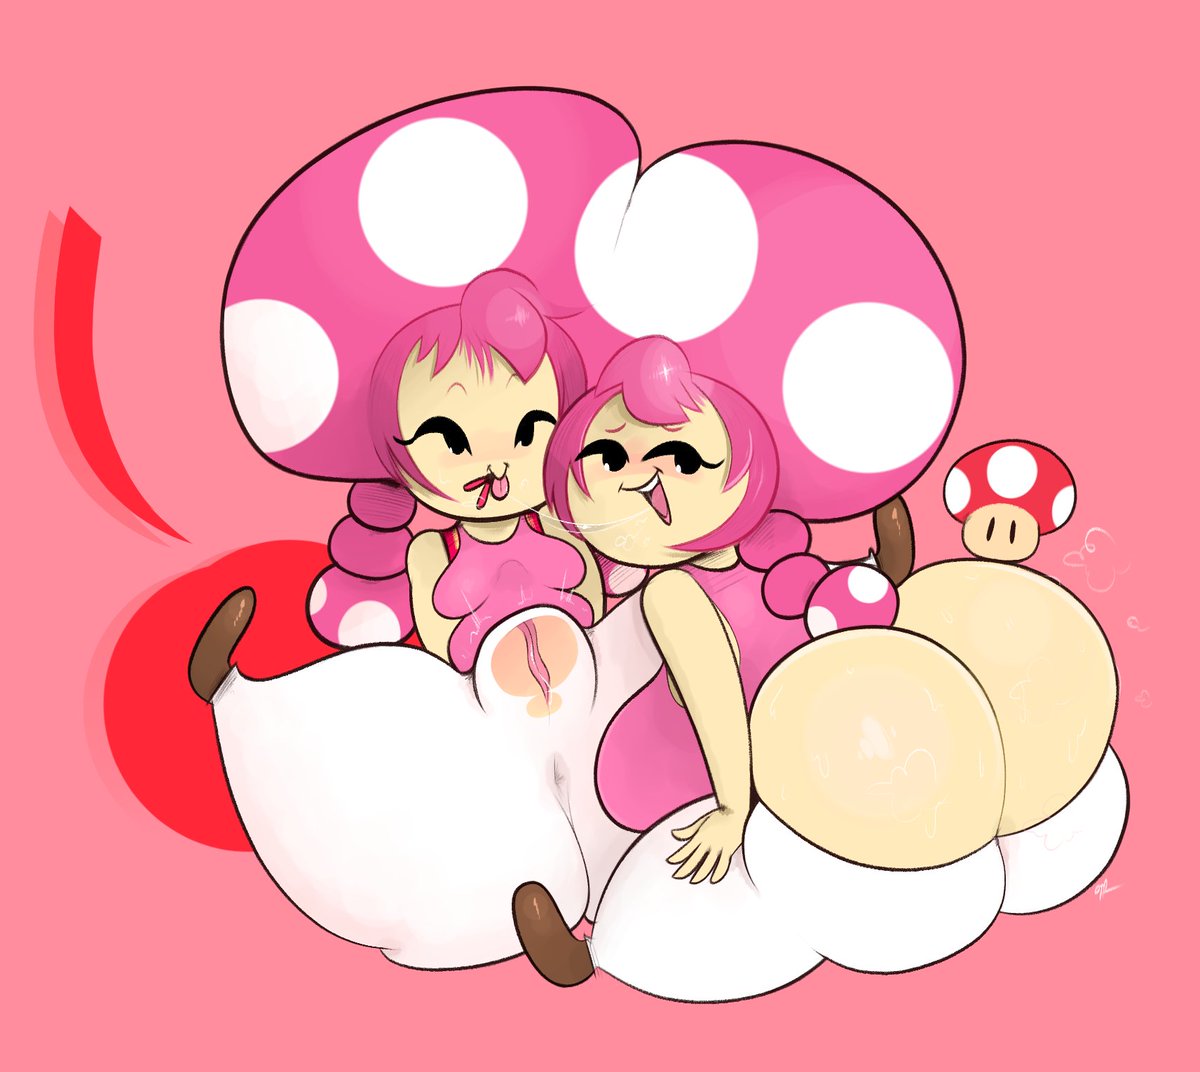 Toadette r34 - 🧡 Rule34 - If it exists, there is porn of it / minus8, goom...